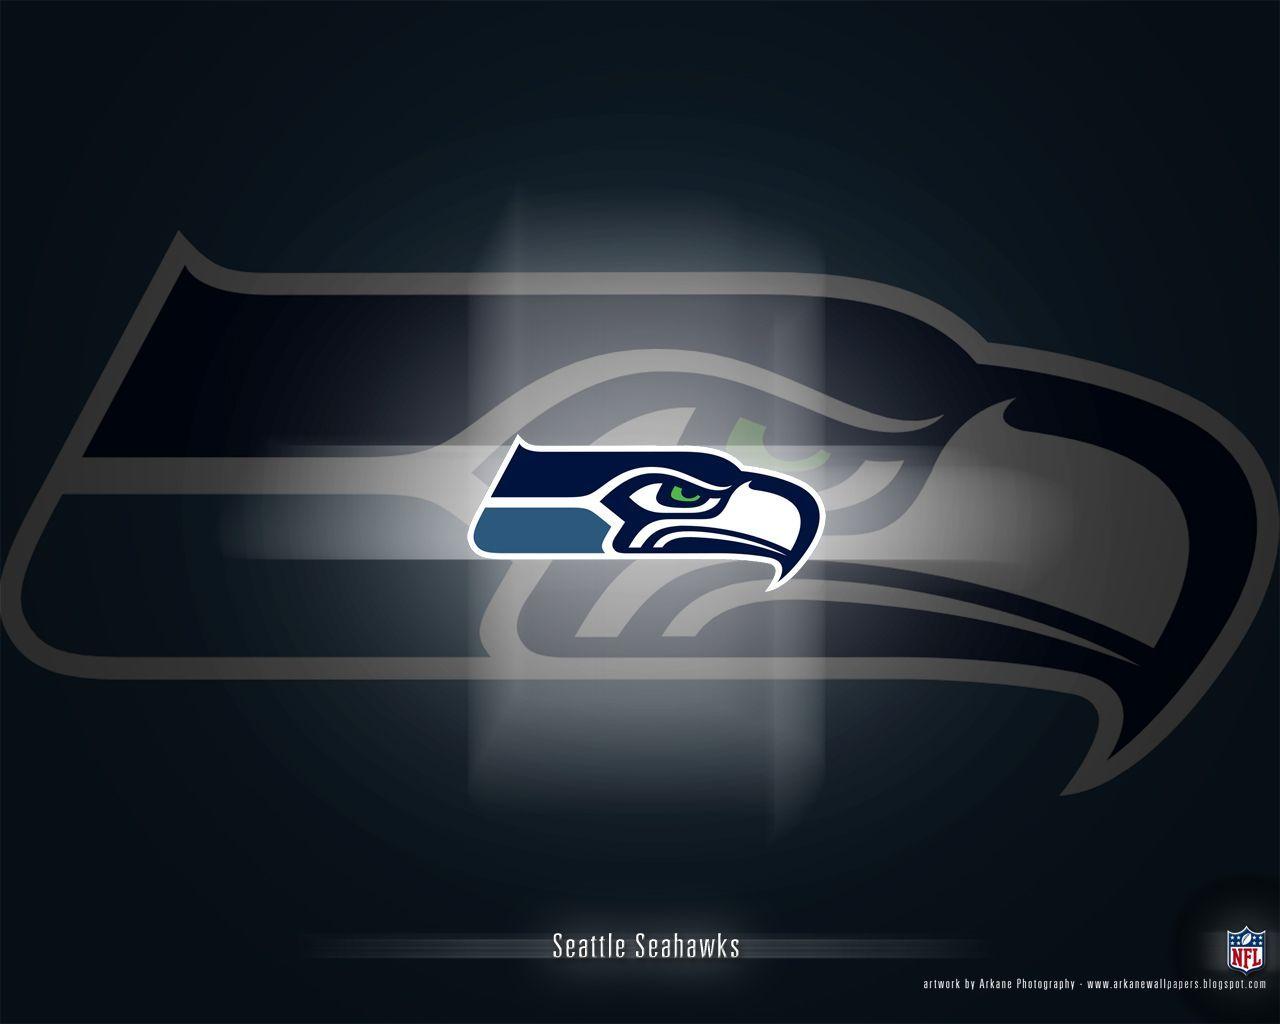 Seattle Seahawks Wallpaper Picture 26511 Image. largepict